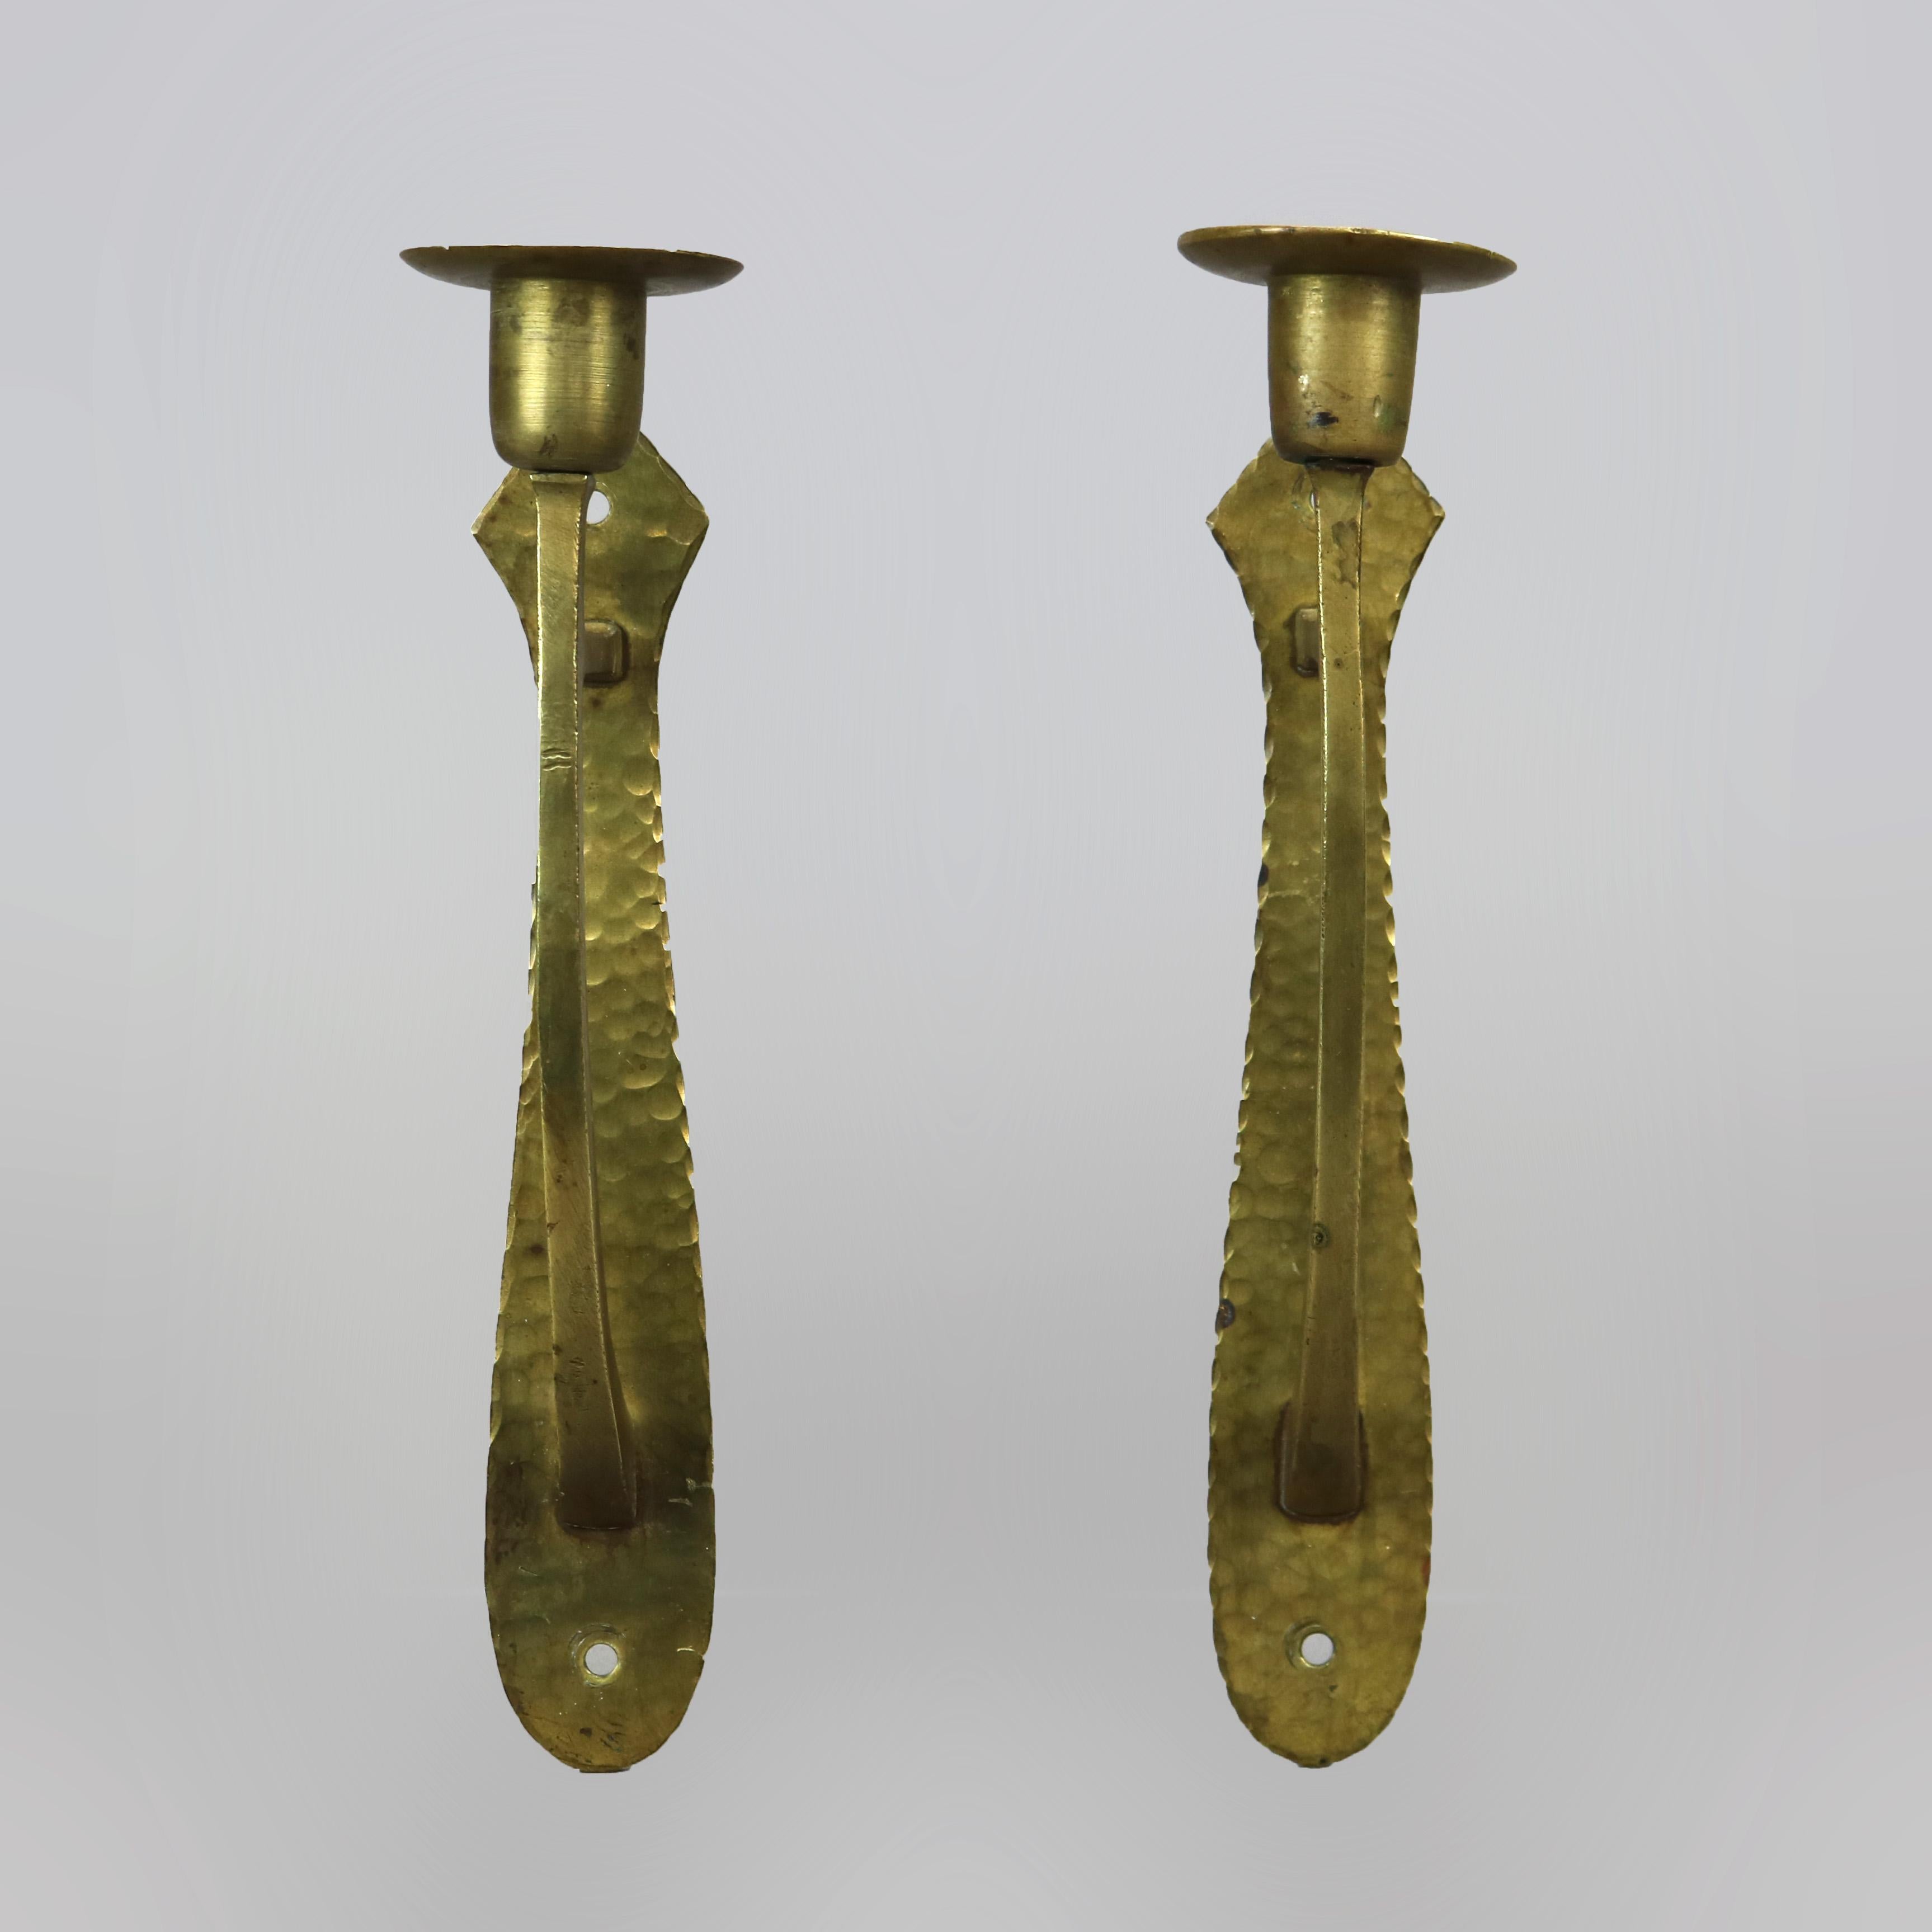 A pair of antique Arts & Crafts wall sconces by Gustav Stickley offers hammered brass construction with stylized shield form plate having scroll arm terminating in candle socket, guaranteed by Gustav Stickley and referenced in the catalog,